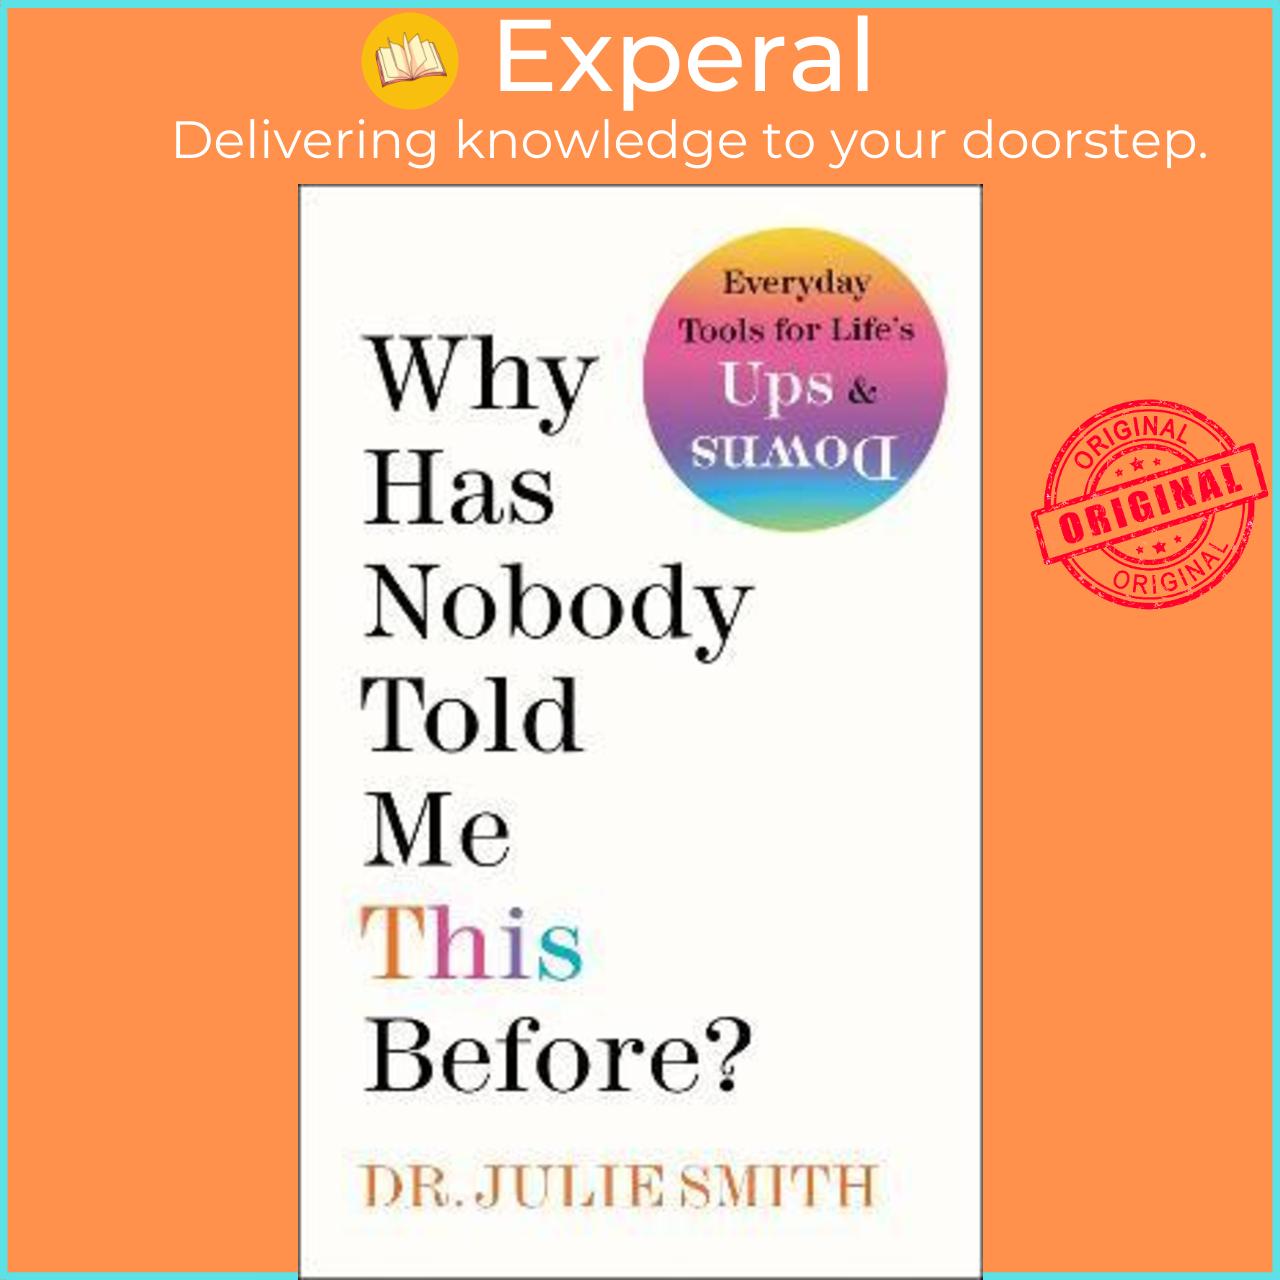 Sách - Why Has Nobody Told Me This Before? by Dr Julie Smith (US edition, hardcover)